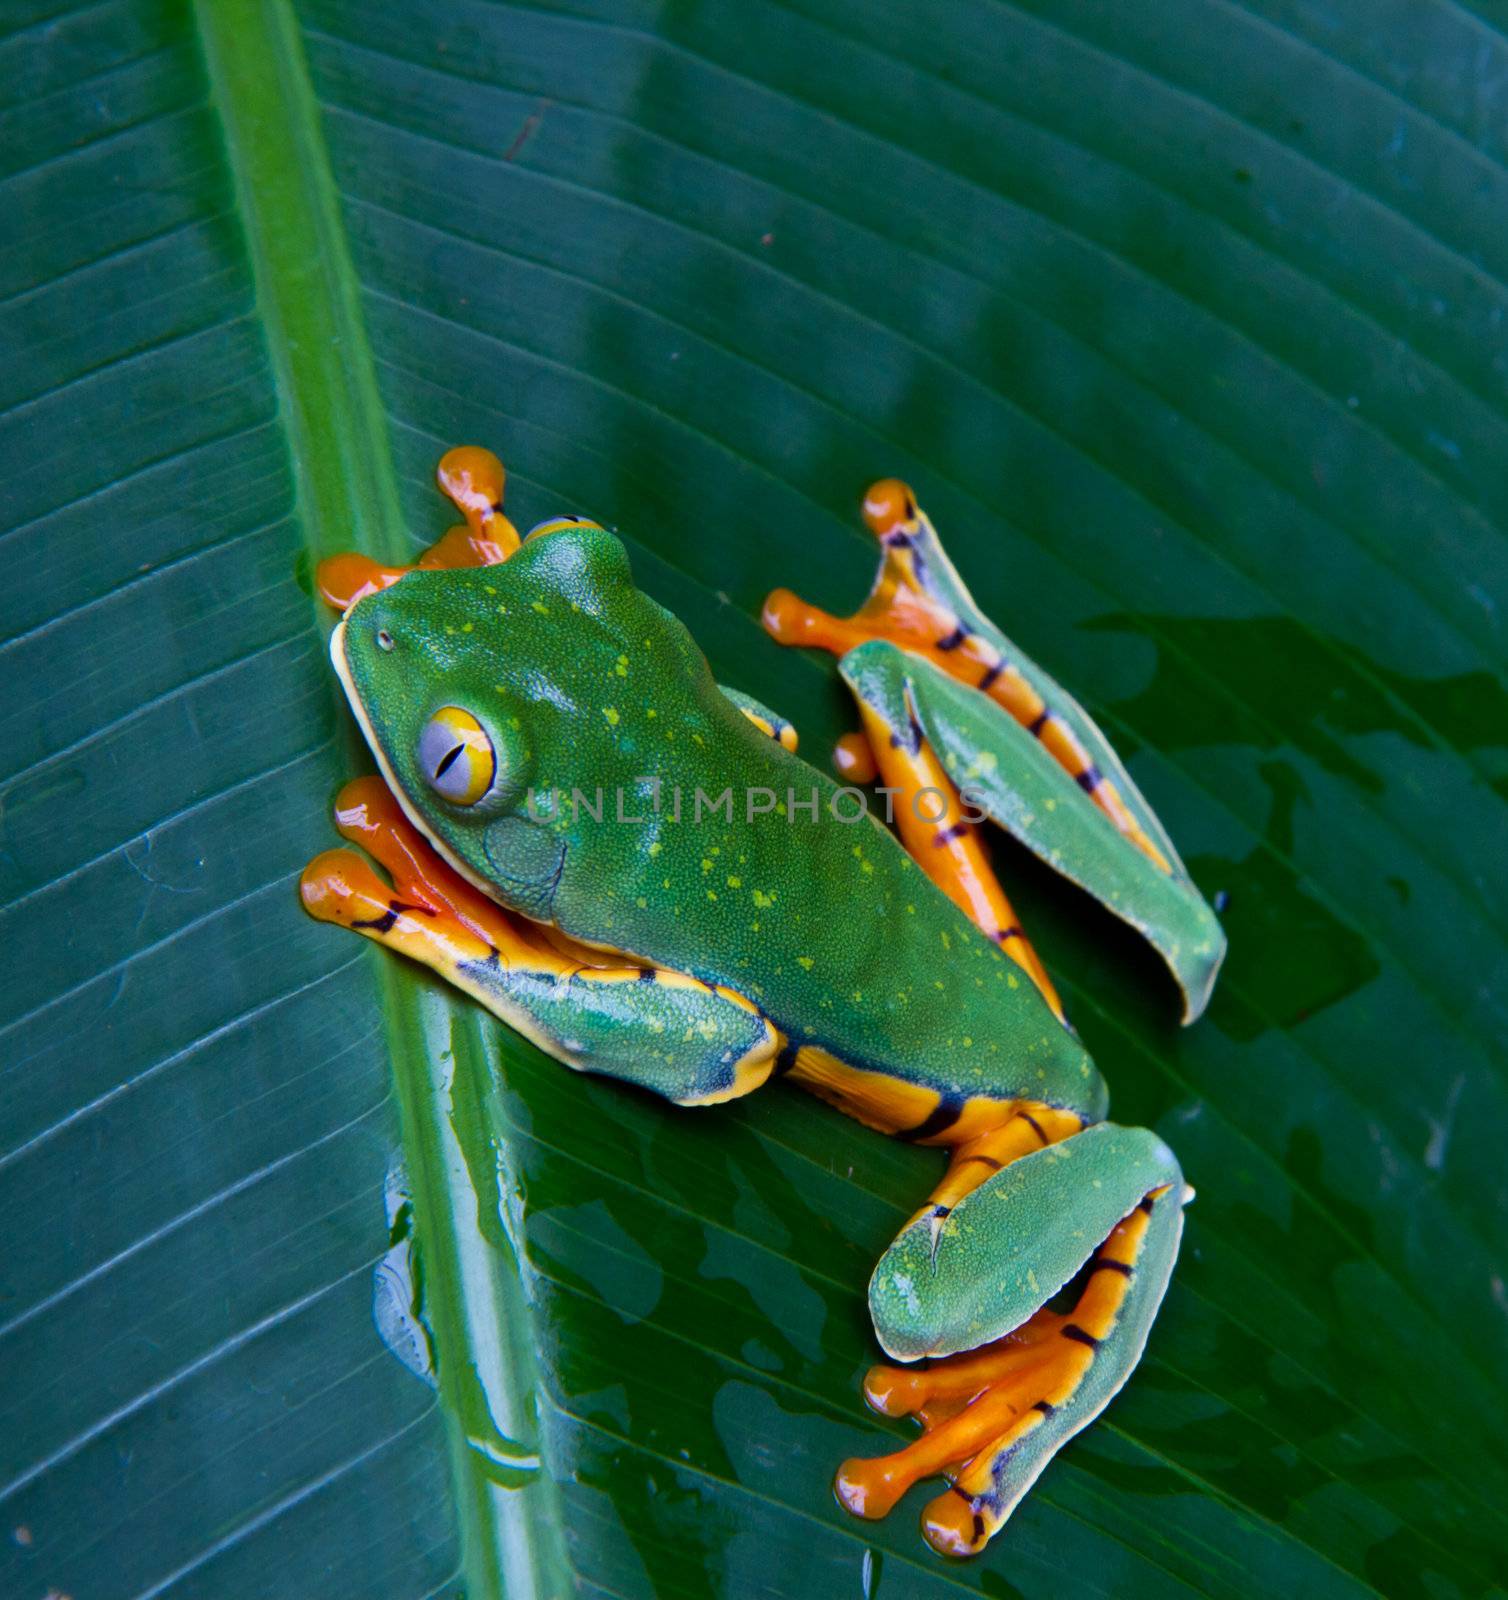 A beatiful south American treefrog leaping through its dense jungle surounds.